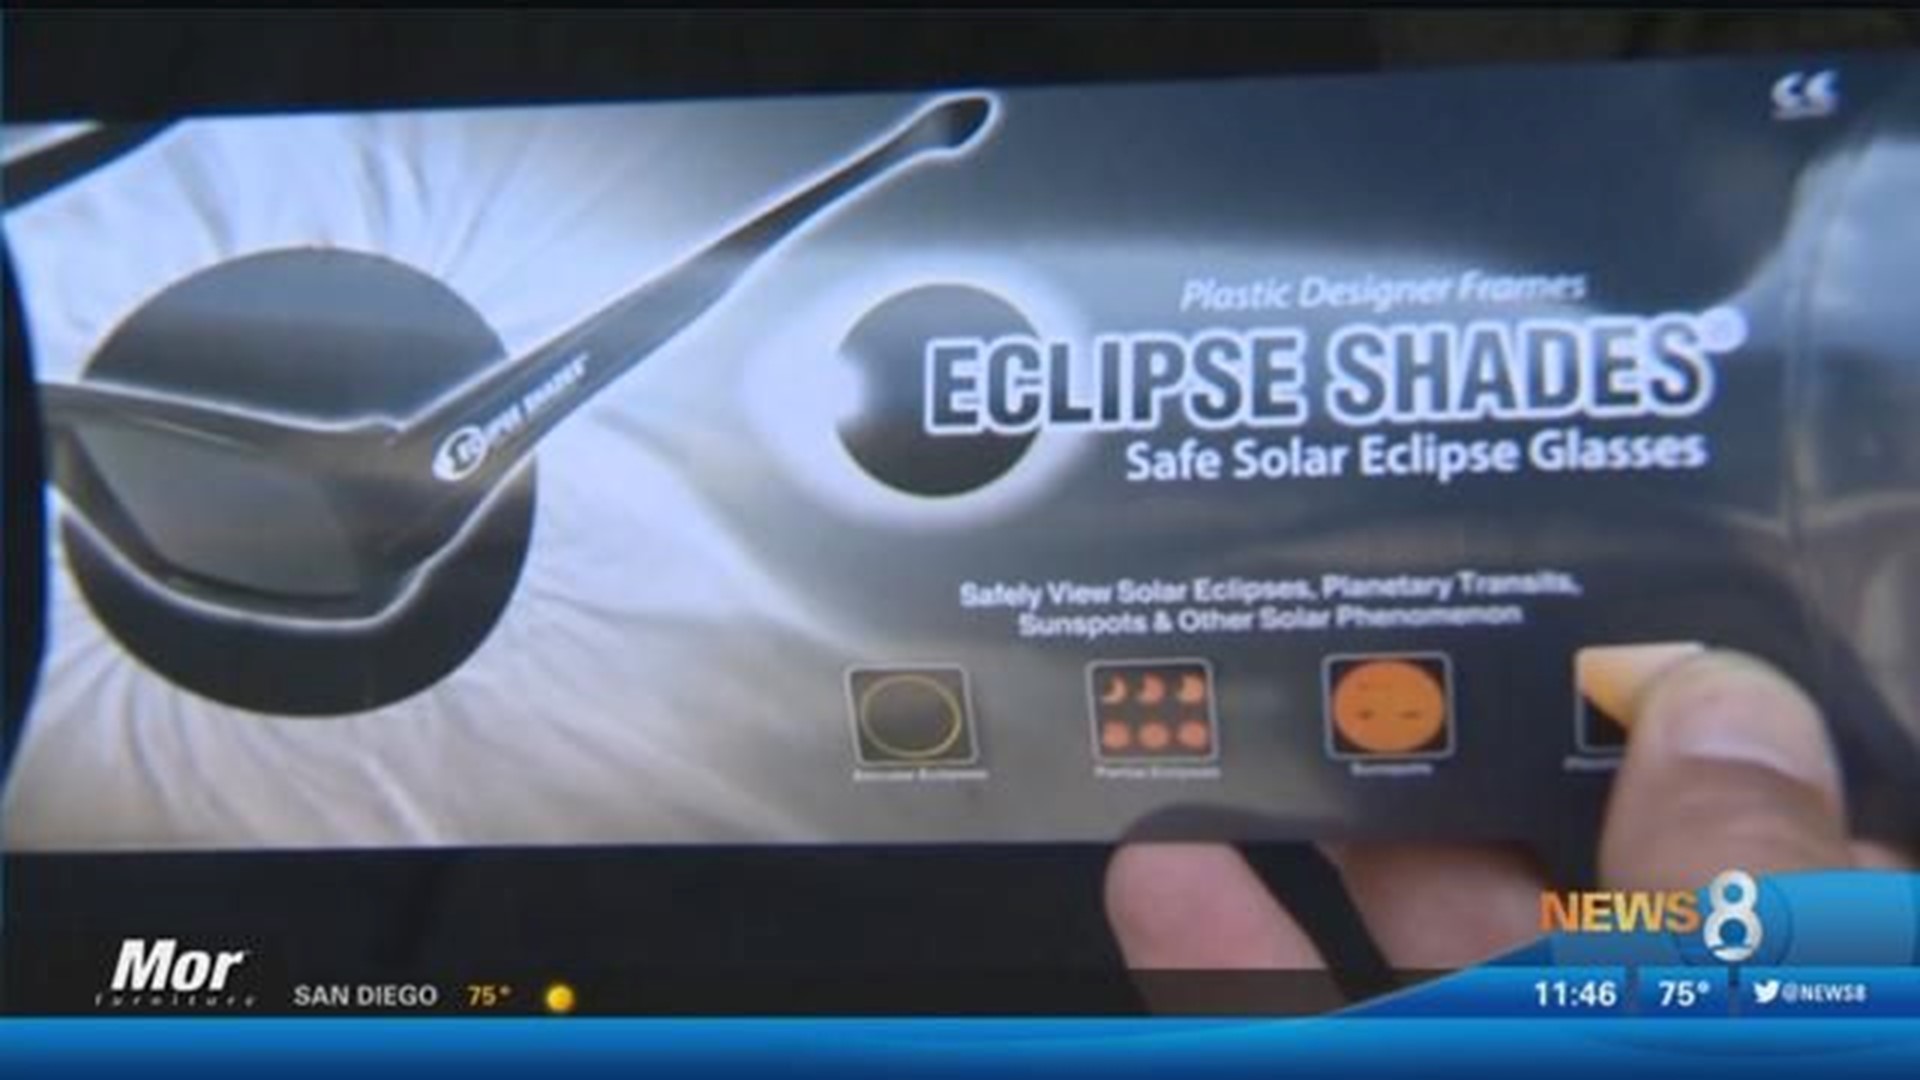 NASA issues safety warnings on fake solar eclipse viewing glasses